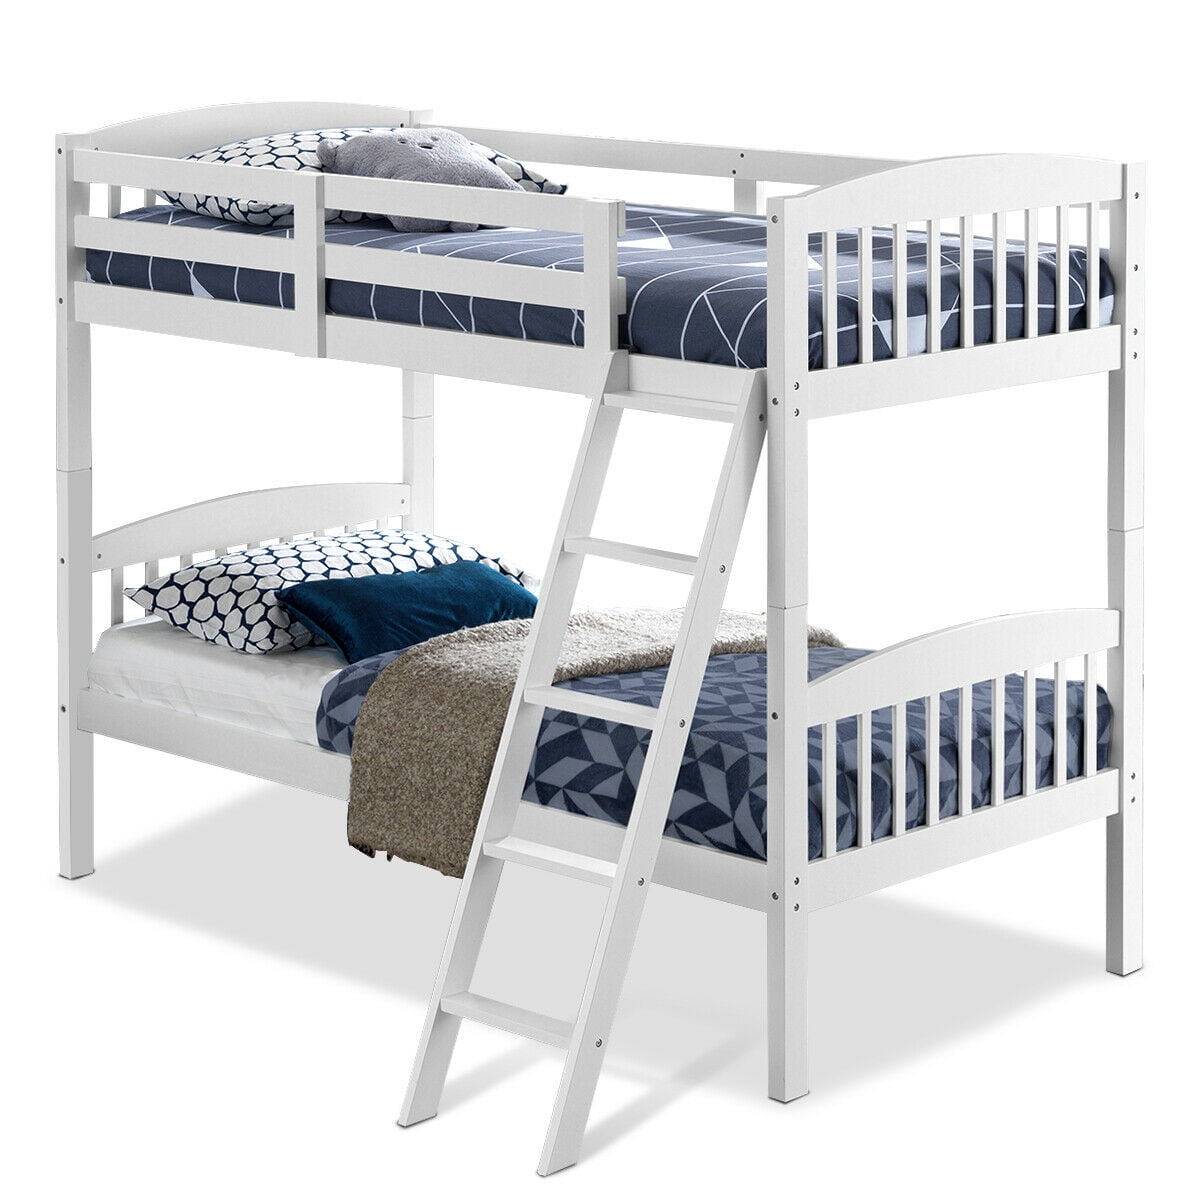 Storkcraft Caribou Twin Over Solid, Storkcraft Long Horn Solid Hardwood Twin Bunk Bed